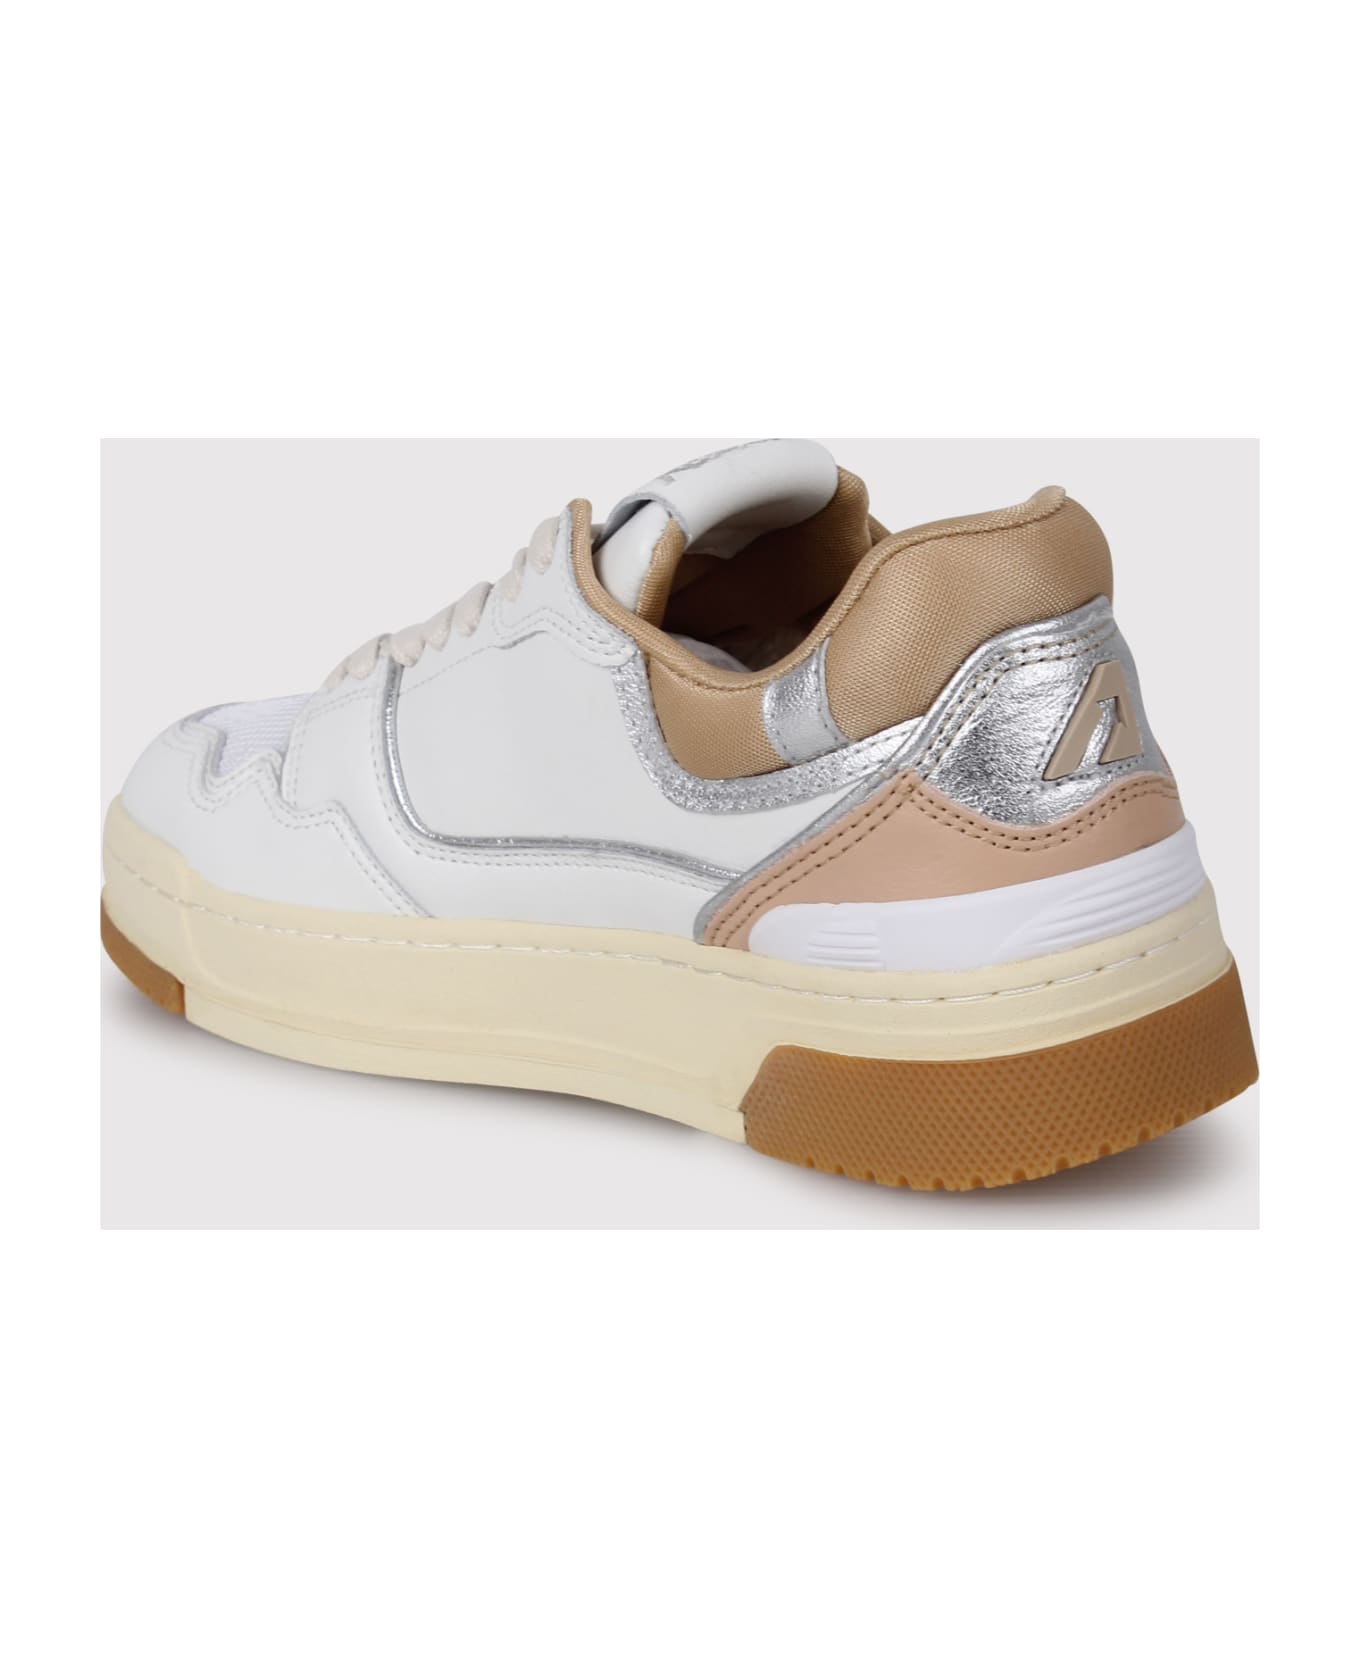 Autry Clc Leather Sneakers